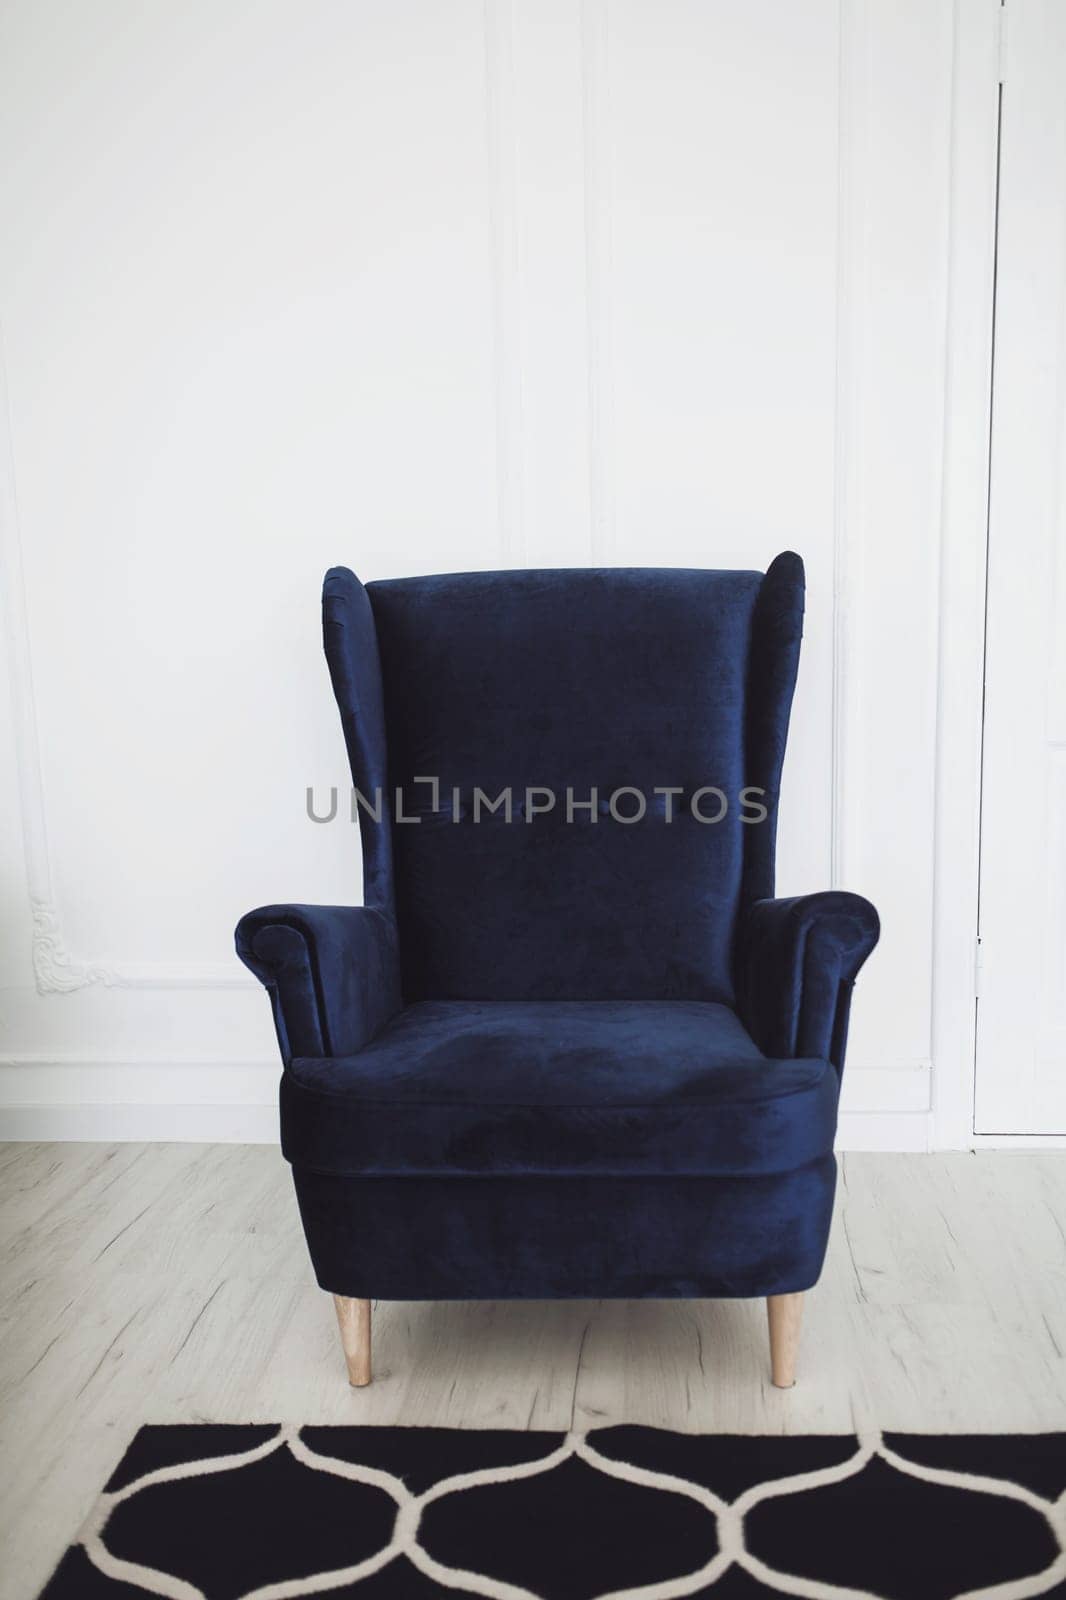 apartment with a vintage chair by Ladouski